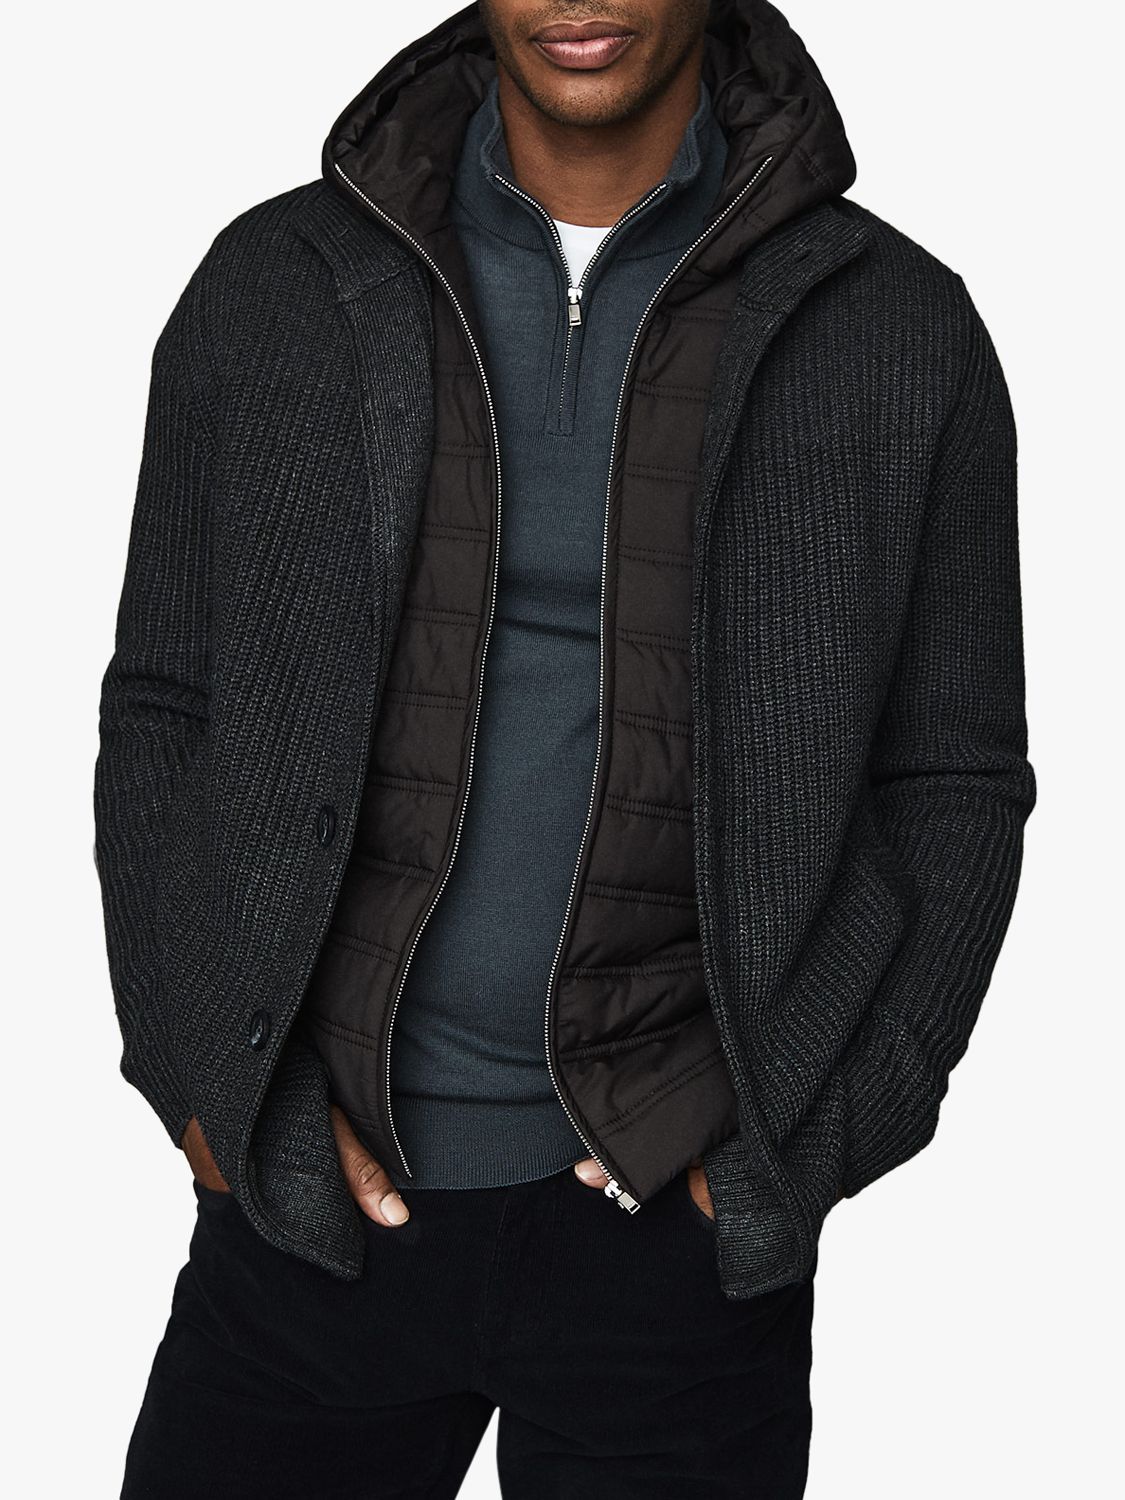 Reiss Carlos Ribbed Cardigan with Hoodie Insert, Charcoal